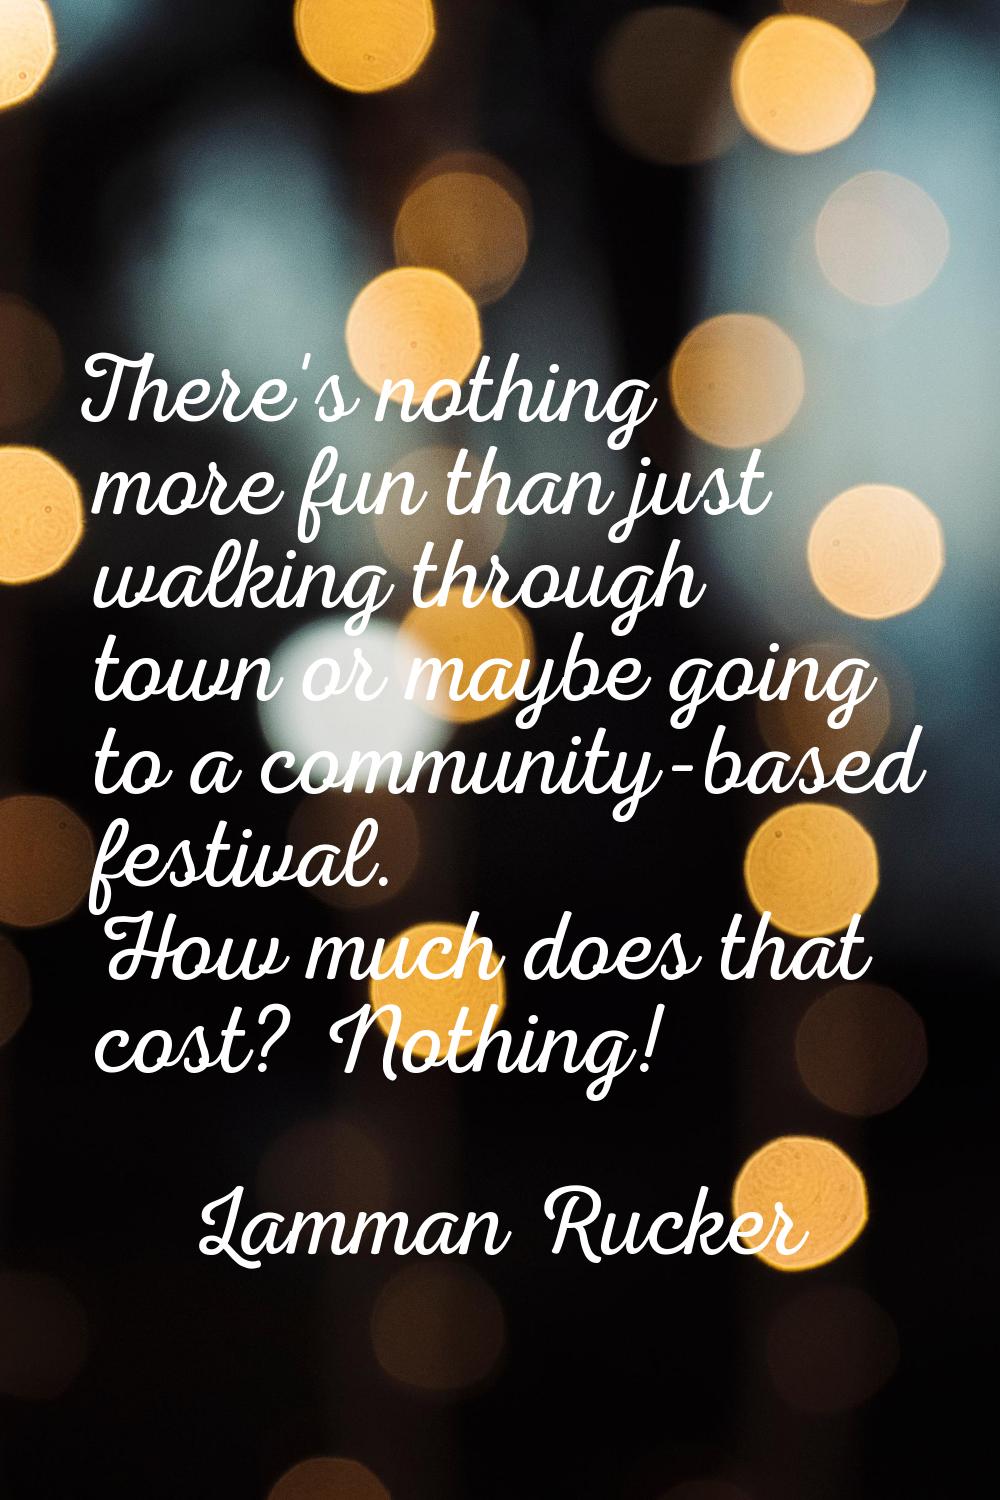 There's nothing more fun than just walking through town or maybe going to a community-based festiva